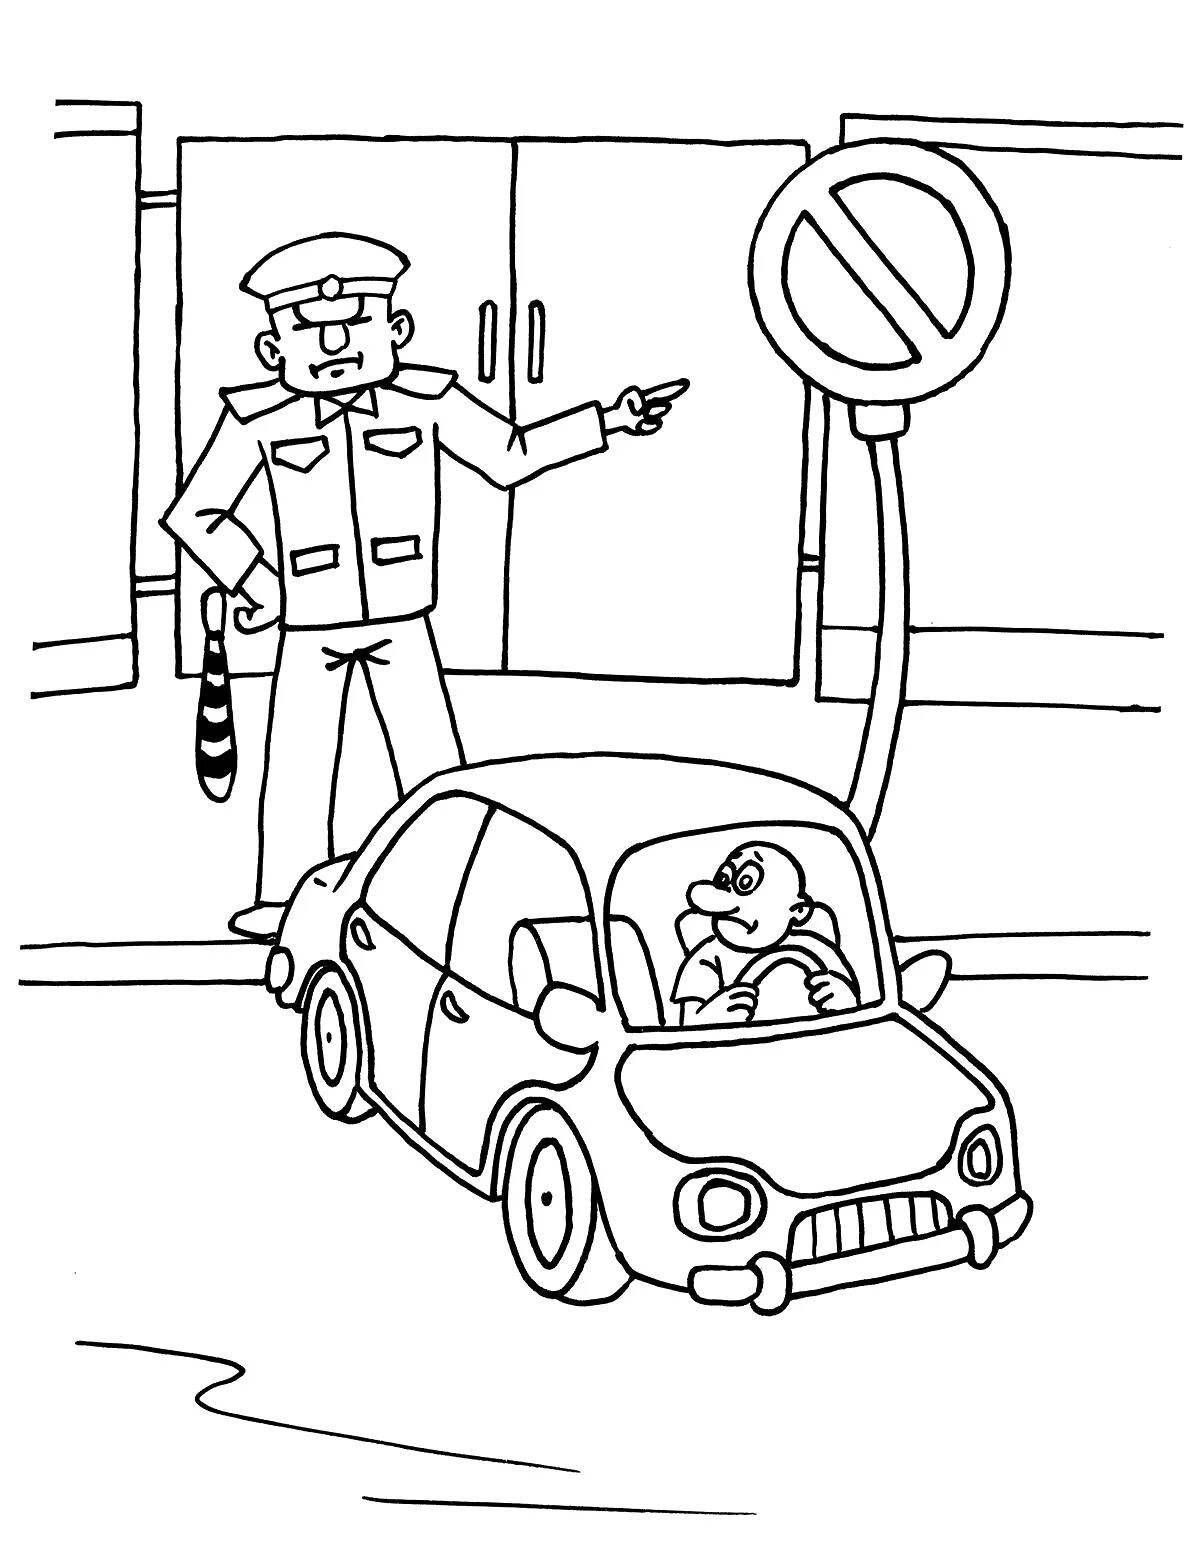 Intriguing traffic rules coloring for grade 2